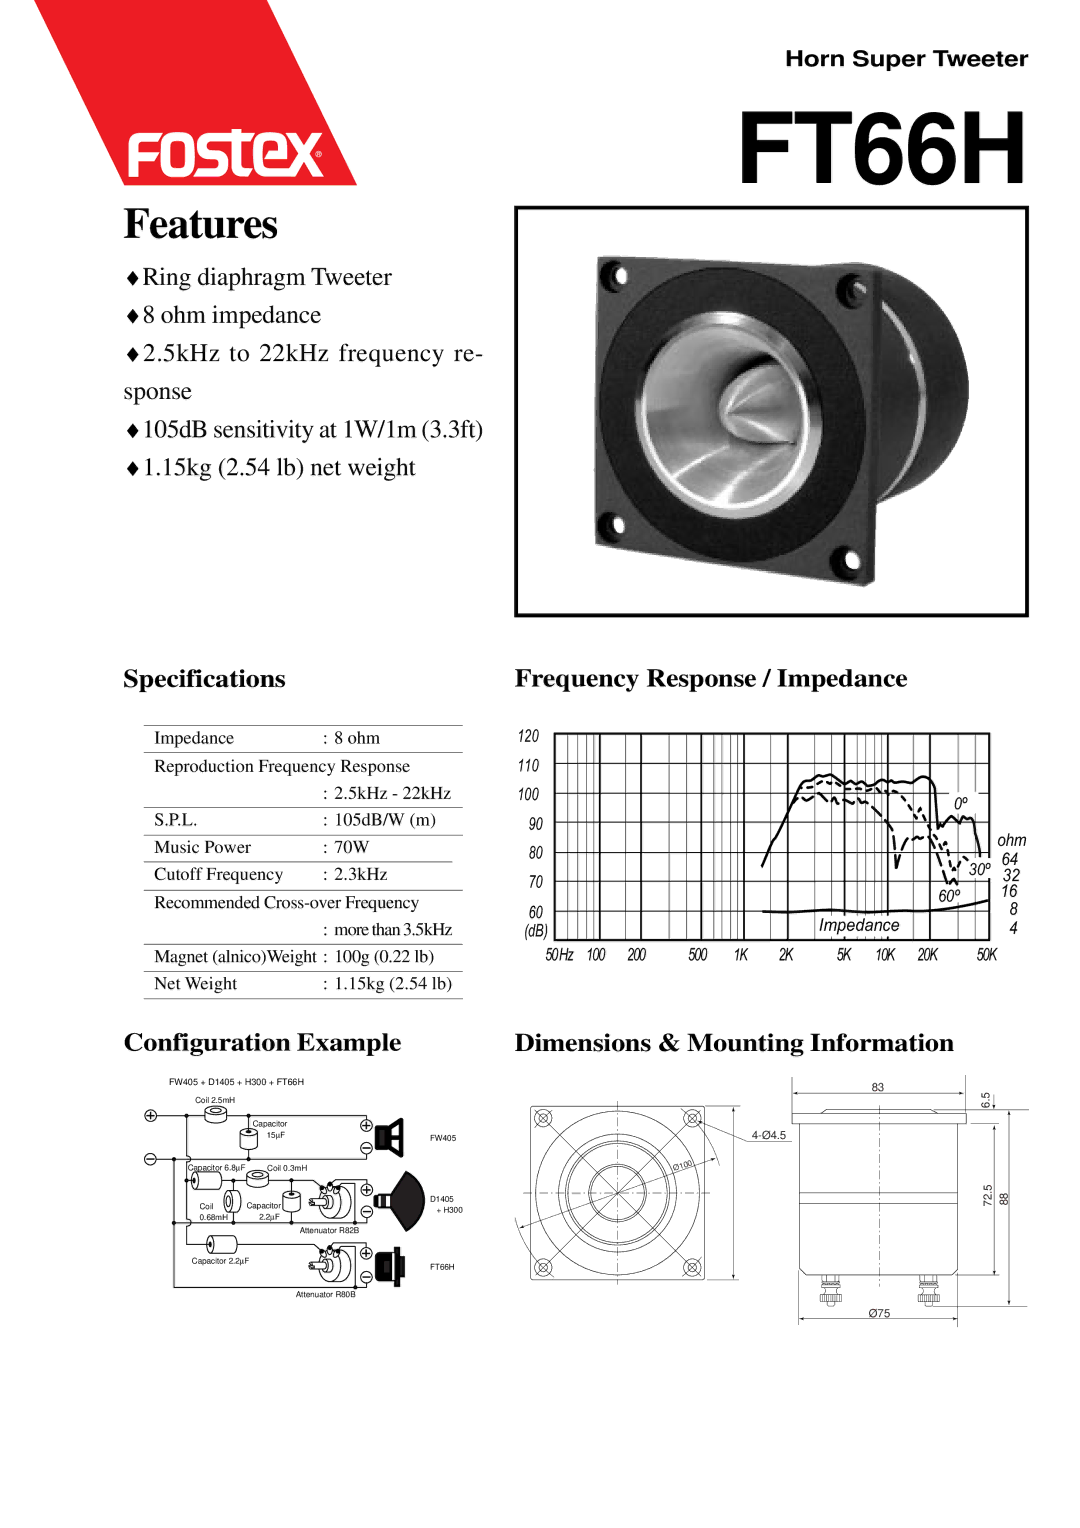 Fostex FT66H dimensions Features, Specifications, Frequency Response / Impedance 